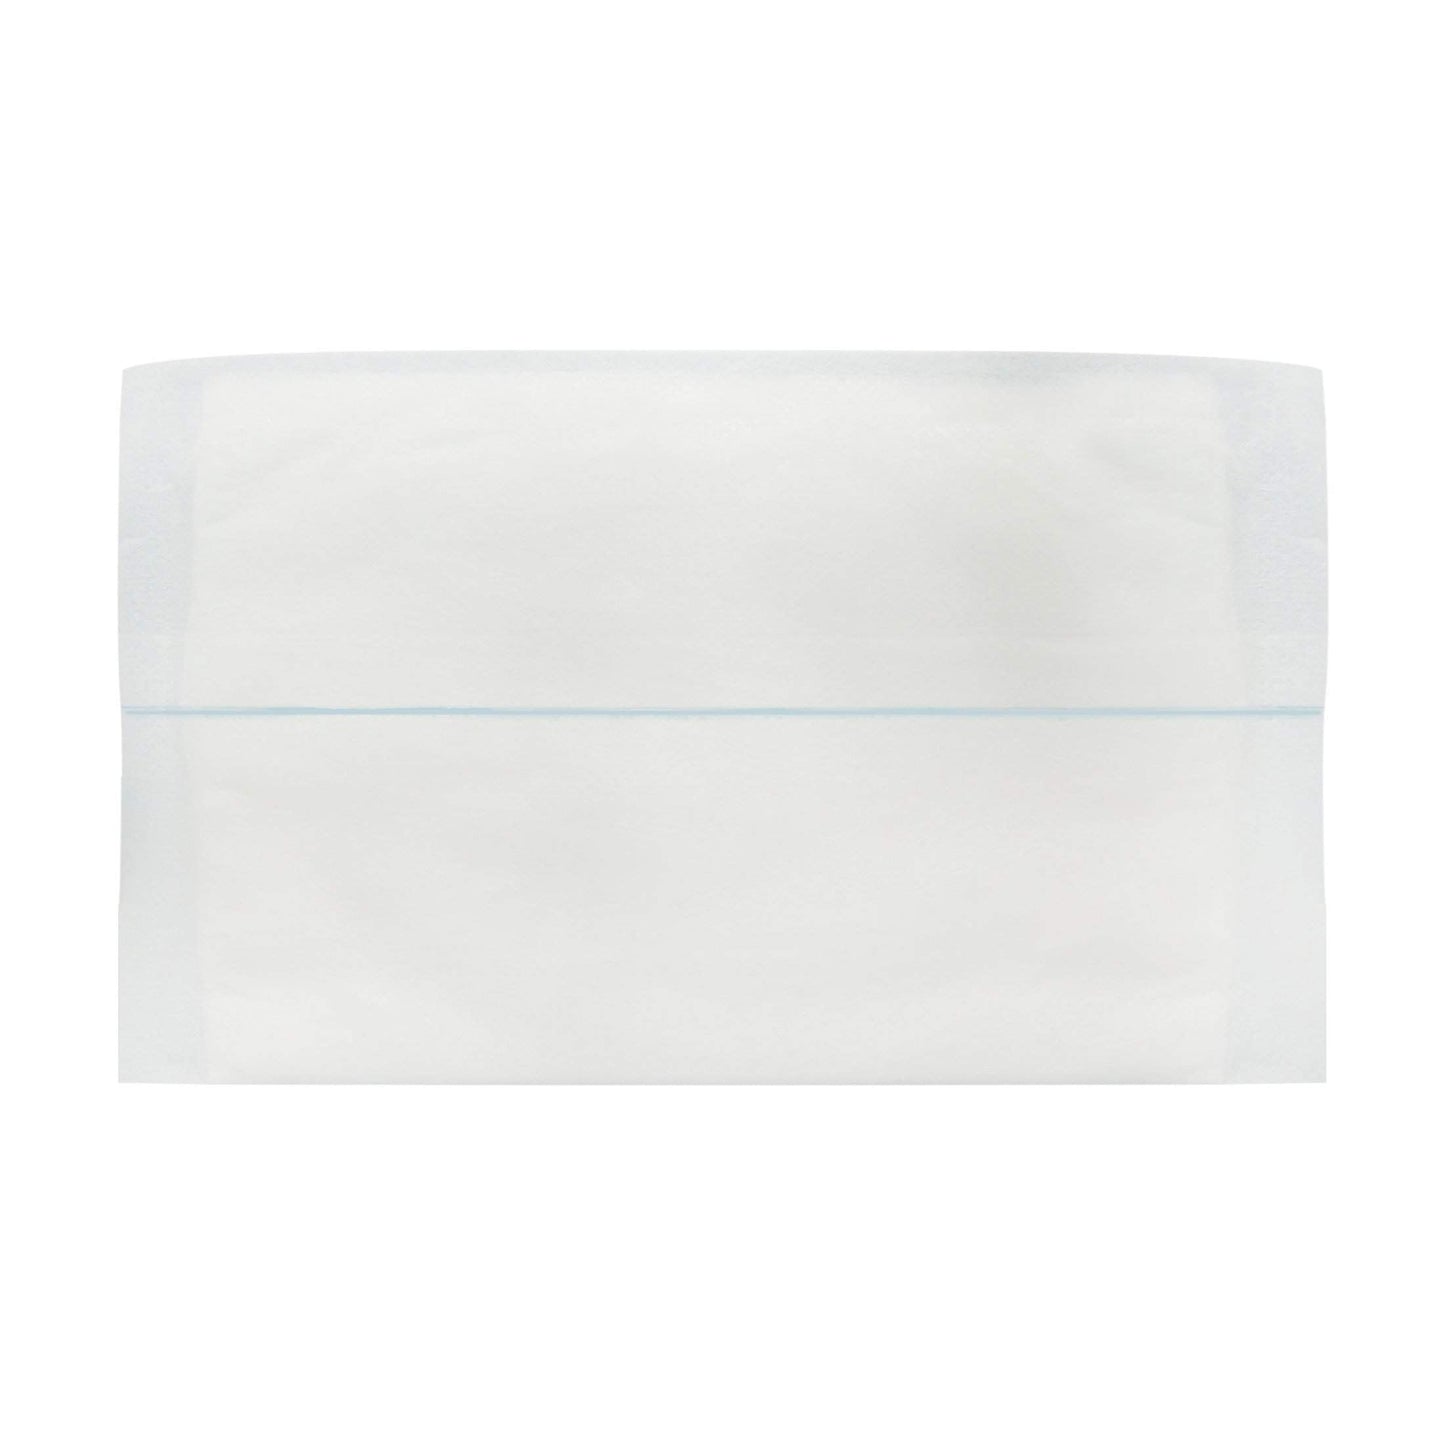 Dukal ABD Pad, Non-Sterile, 12" x 16" (Pack of 25) 5945-Dukal-Brand_Dukal/ Dawn Mist,Collection_Lifestyle,Dukal_Gauze,Dukal_Medical,Life_Medical